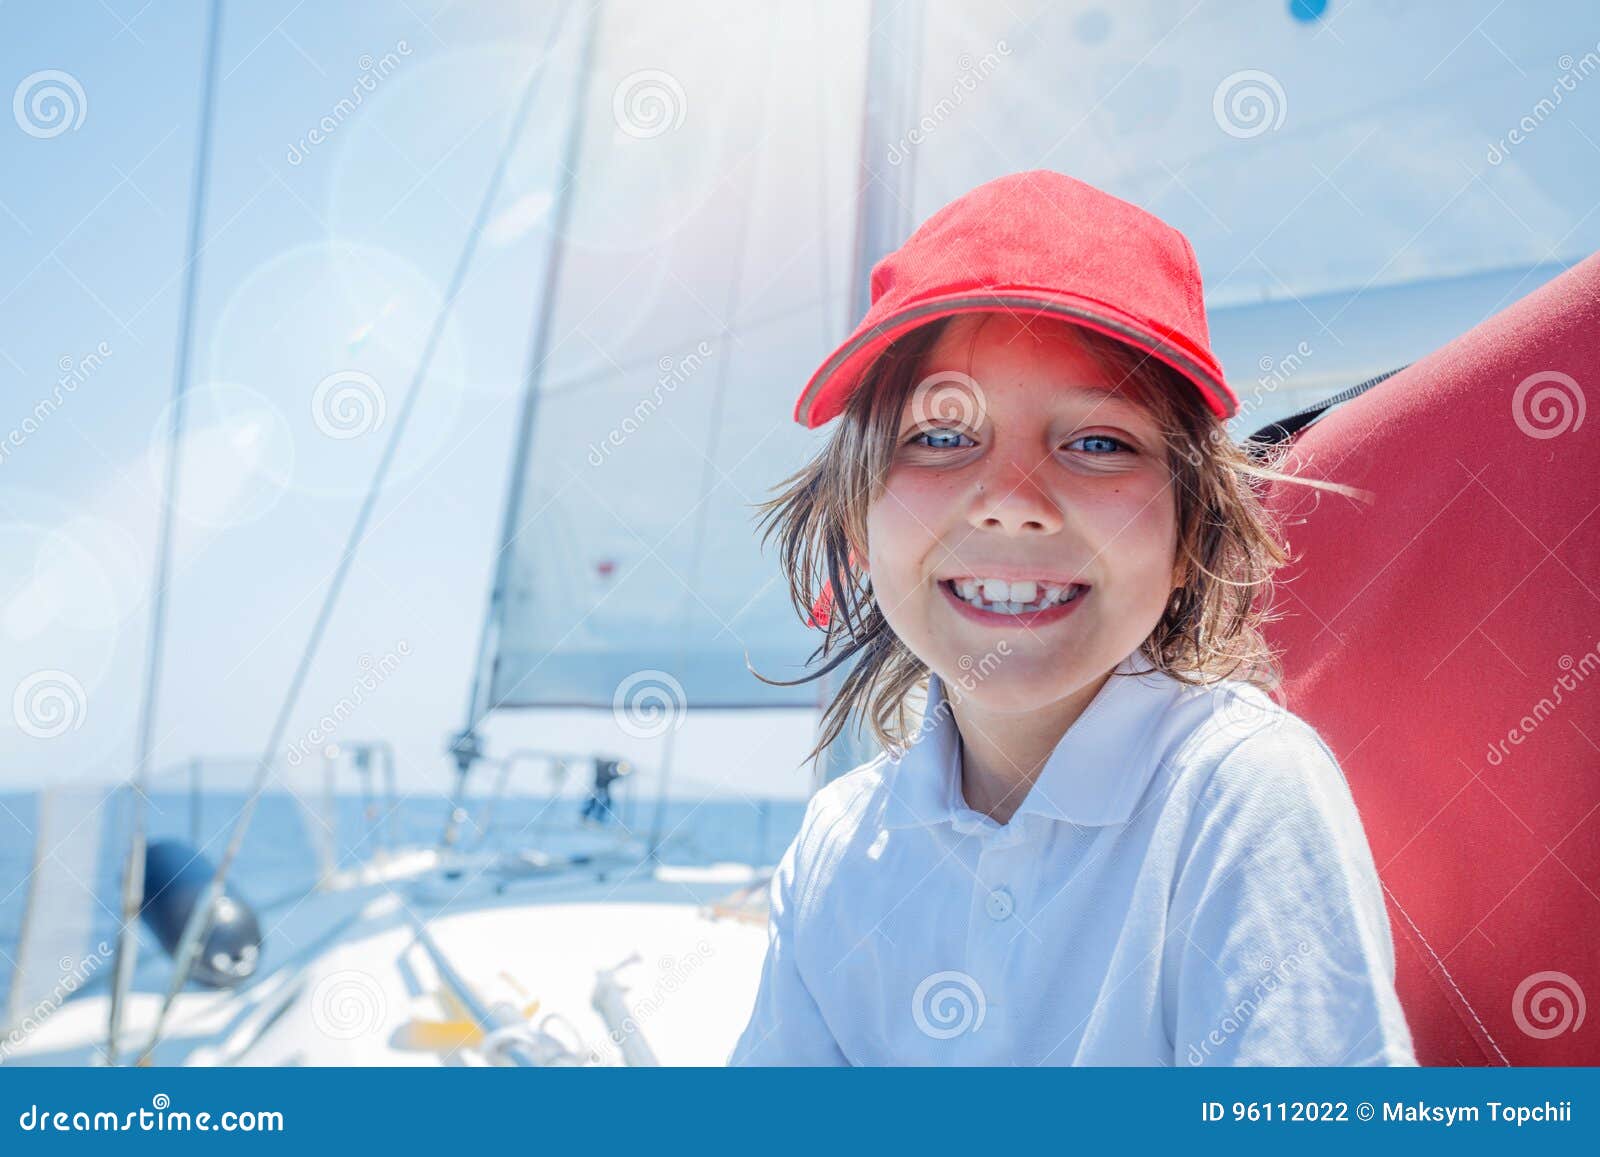 little boy captain on board of sailing yacht on summer cruise. travel adventure, yachting with child on family vacation.